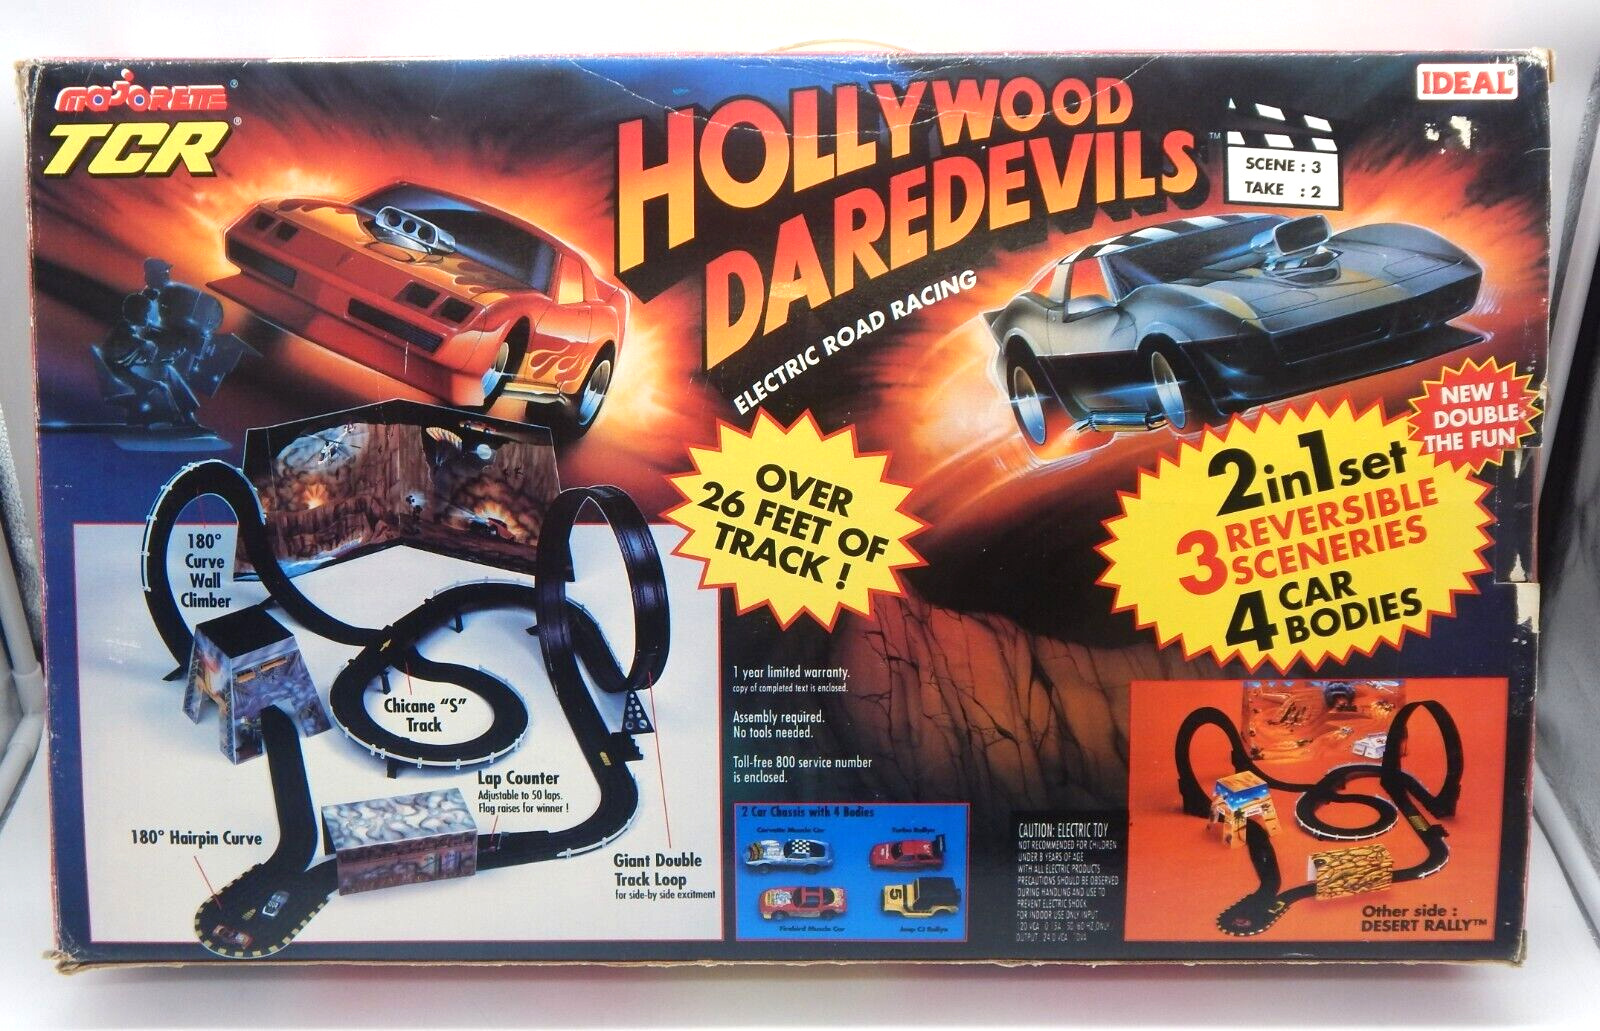 RARE VTG Ideal Hollywood Daredevils TCR Electric Racing Set W/Box Not Complete